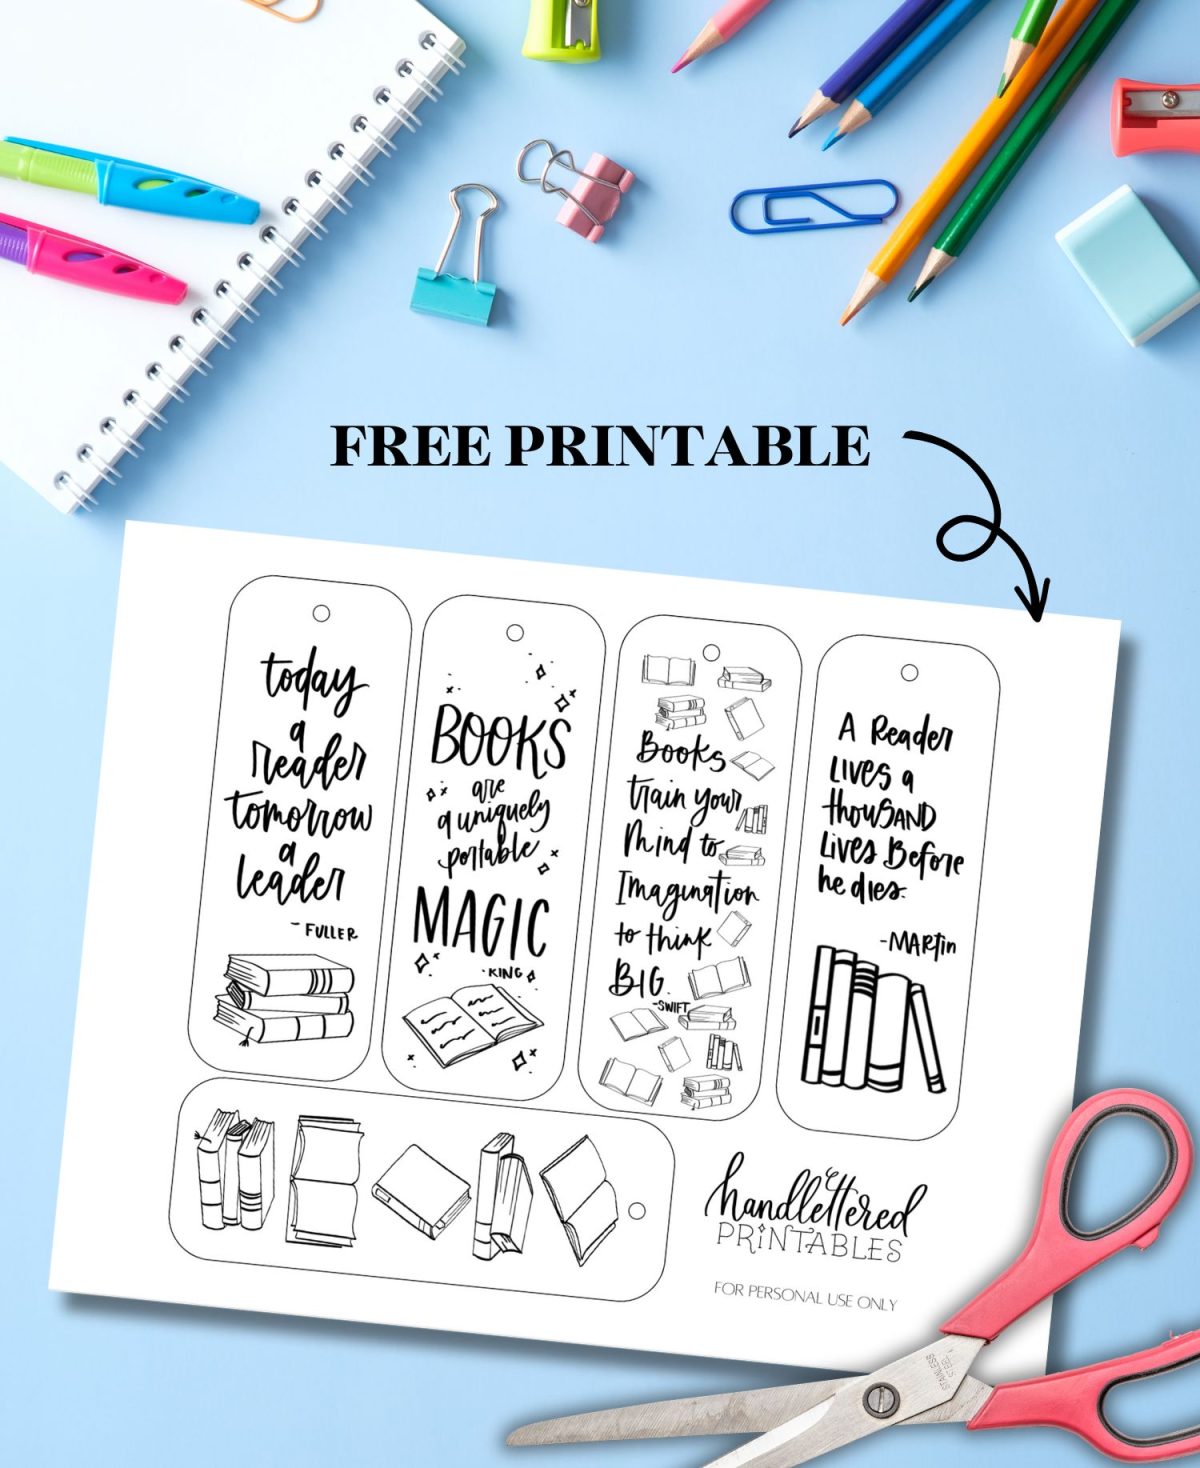 Free Printable bookmarks on one printed sheet on desk with scissors and other office supplies. Text over reads: free printable